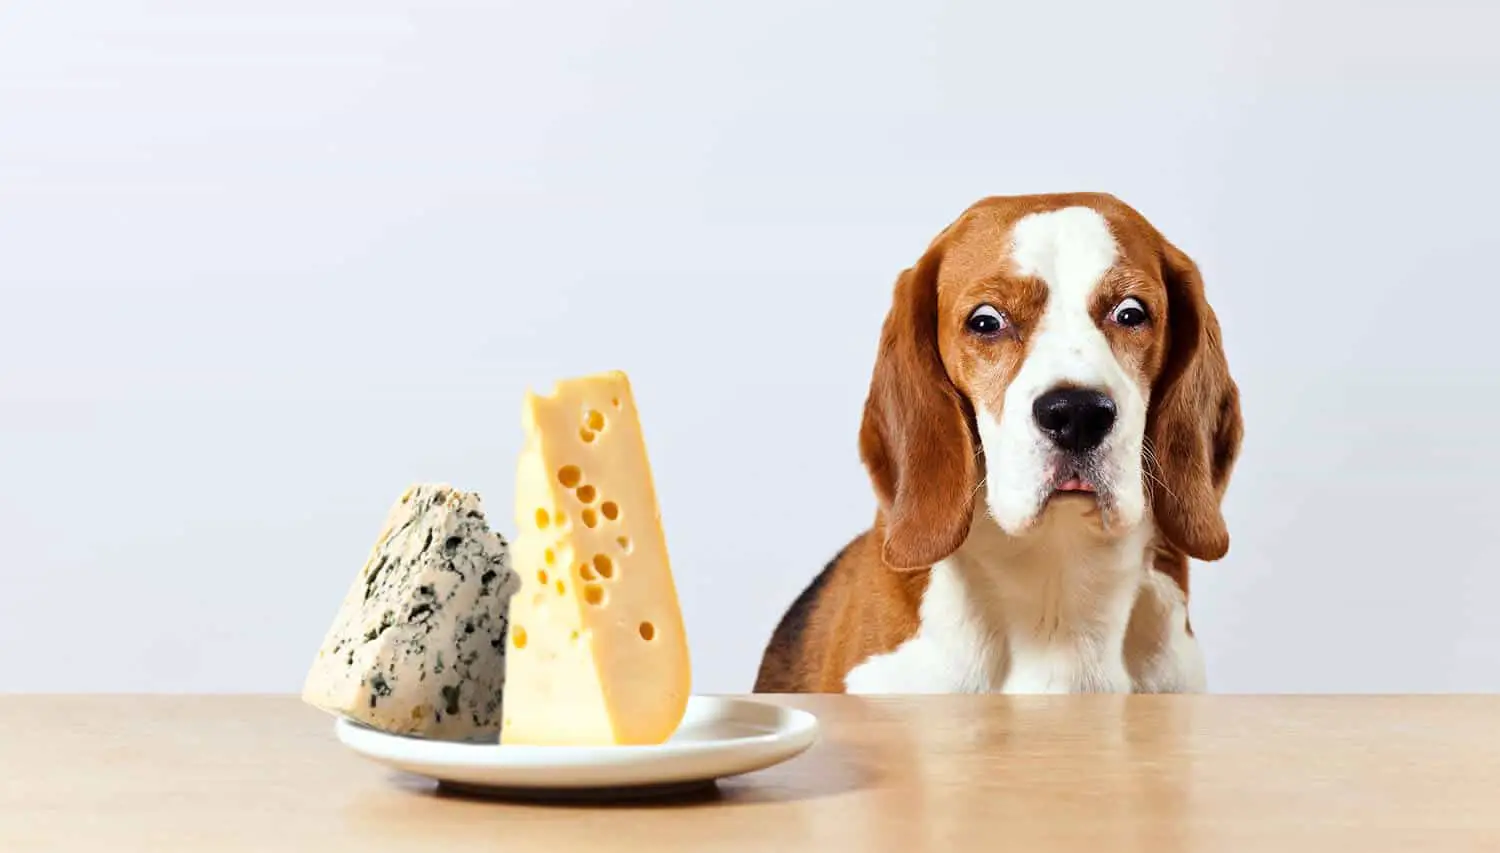 Can Dogs Eat Cream Cheese? Will They Get Sick?